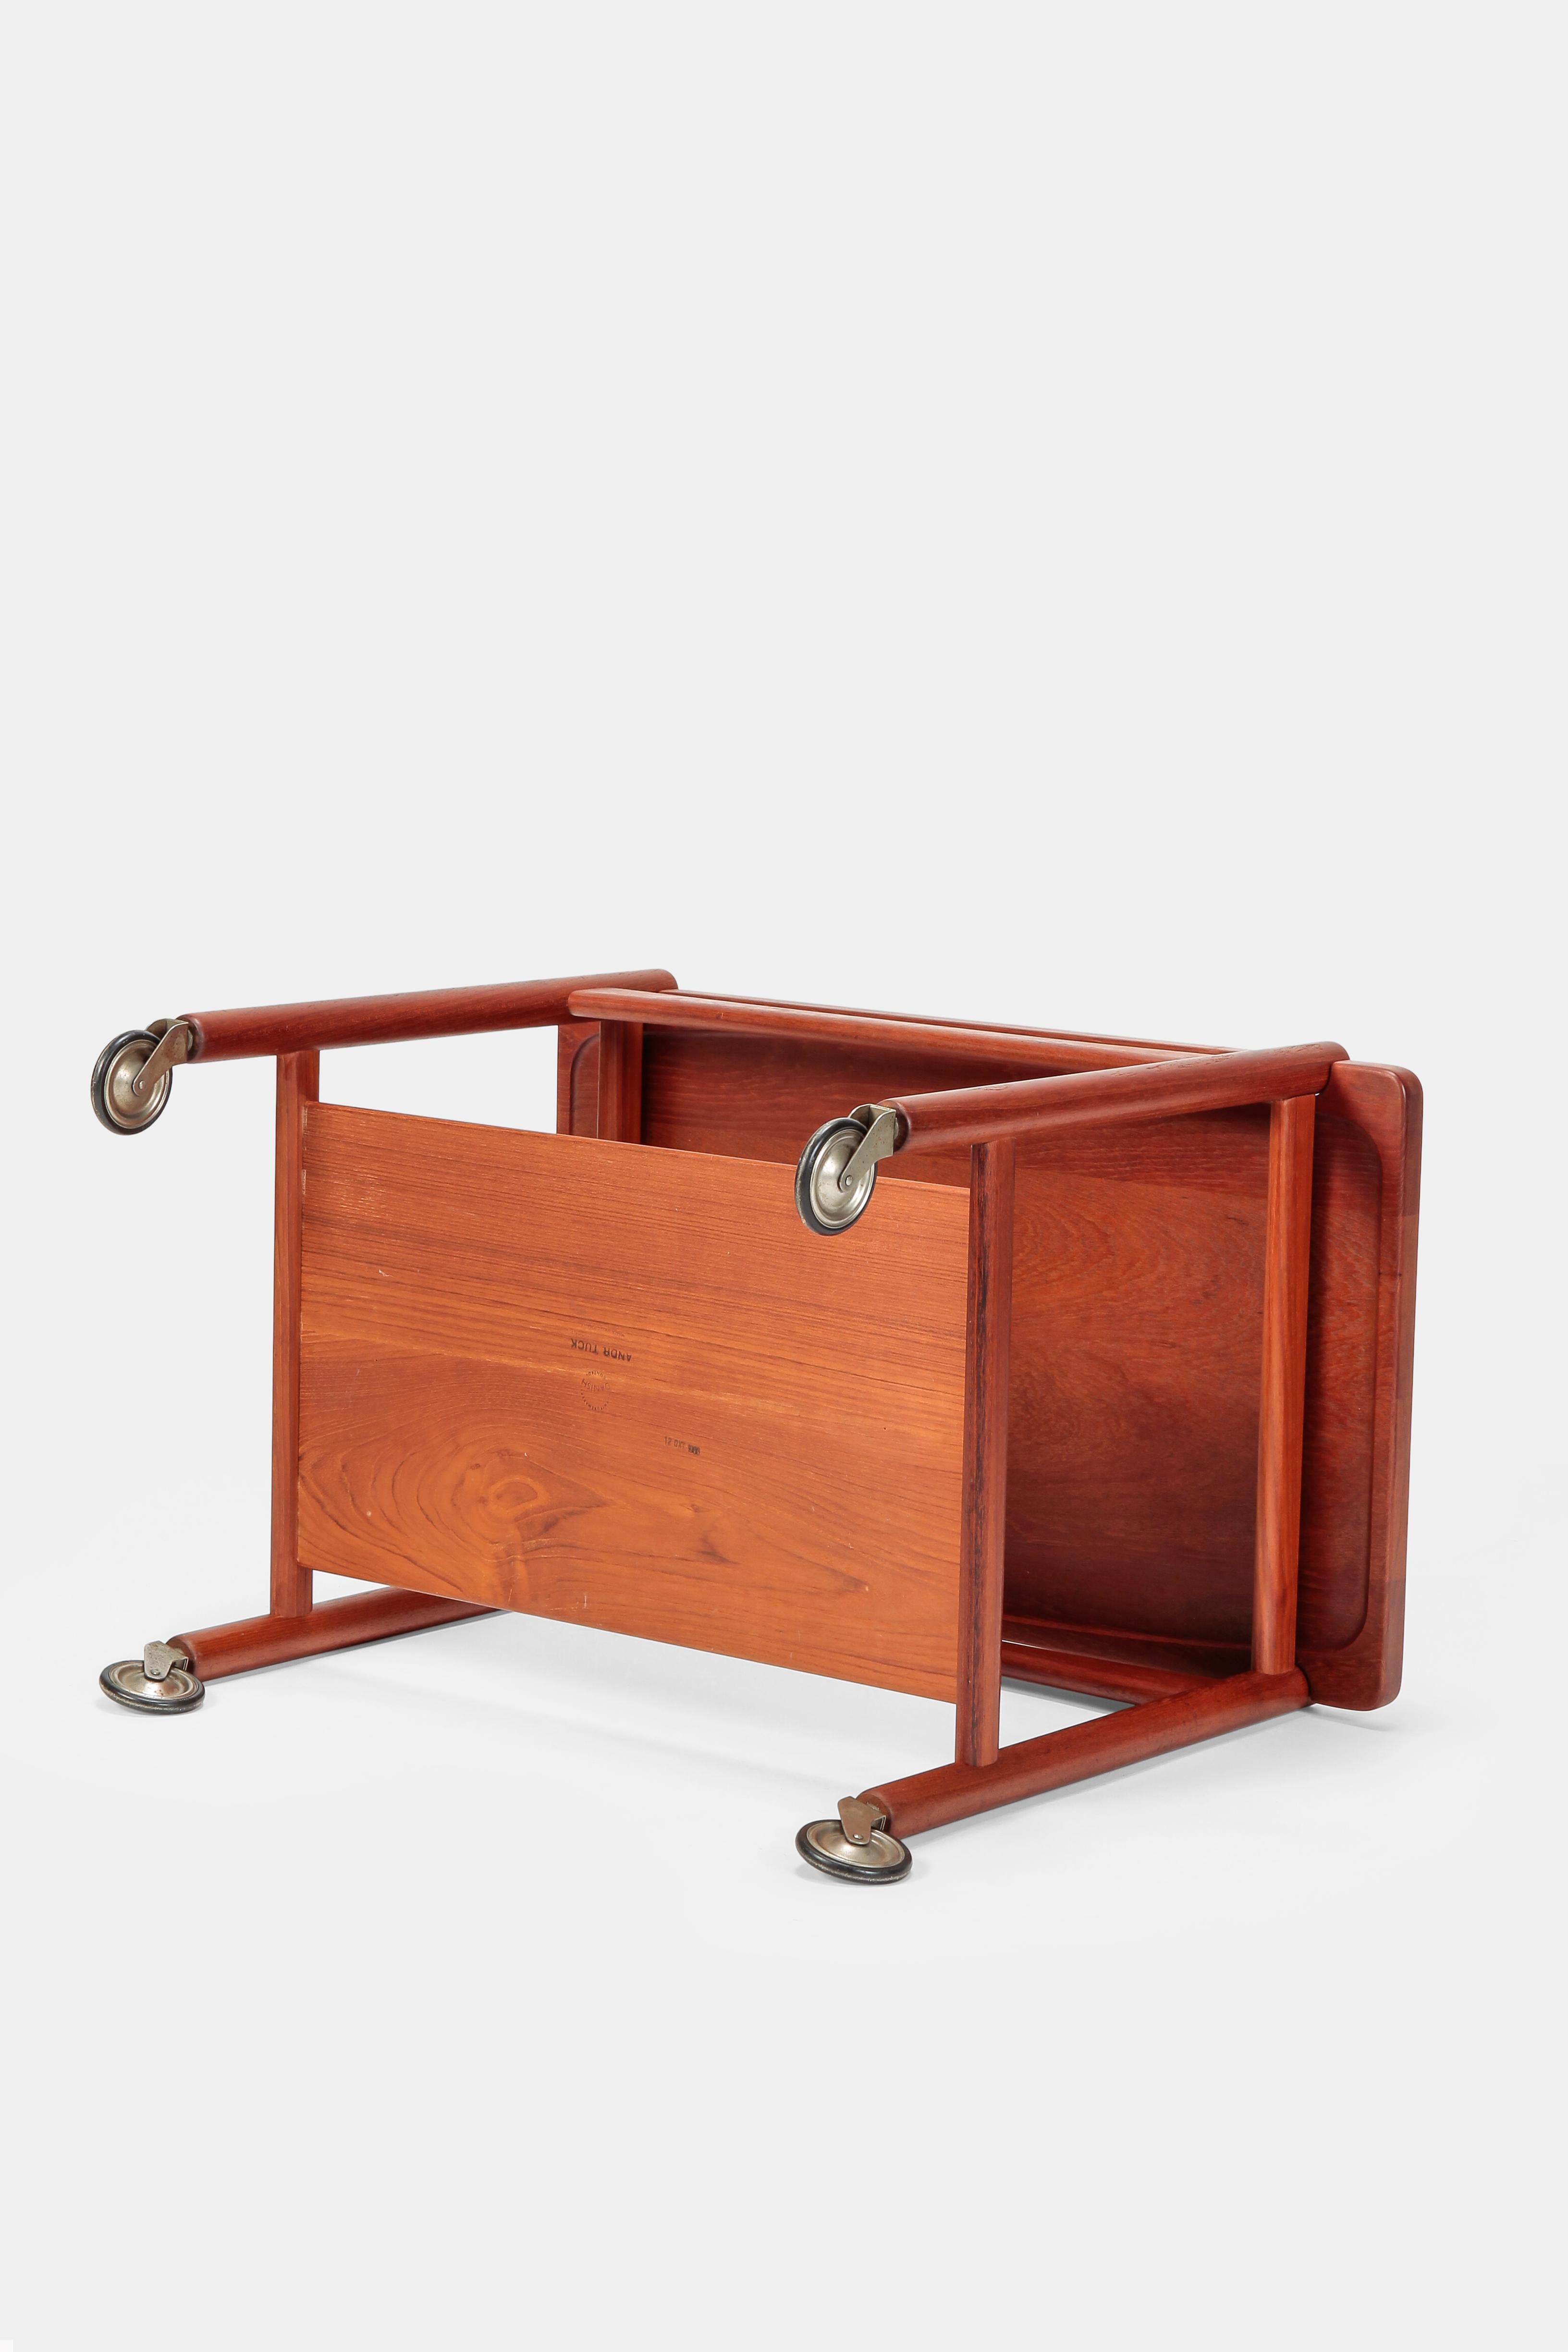 Mid-20th Century Hans Wegner Serving Trolley Andreas Tuck 48, 1960s For Sale